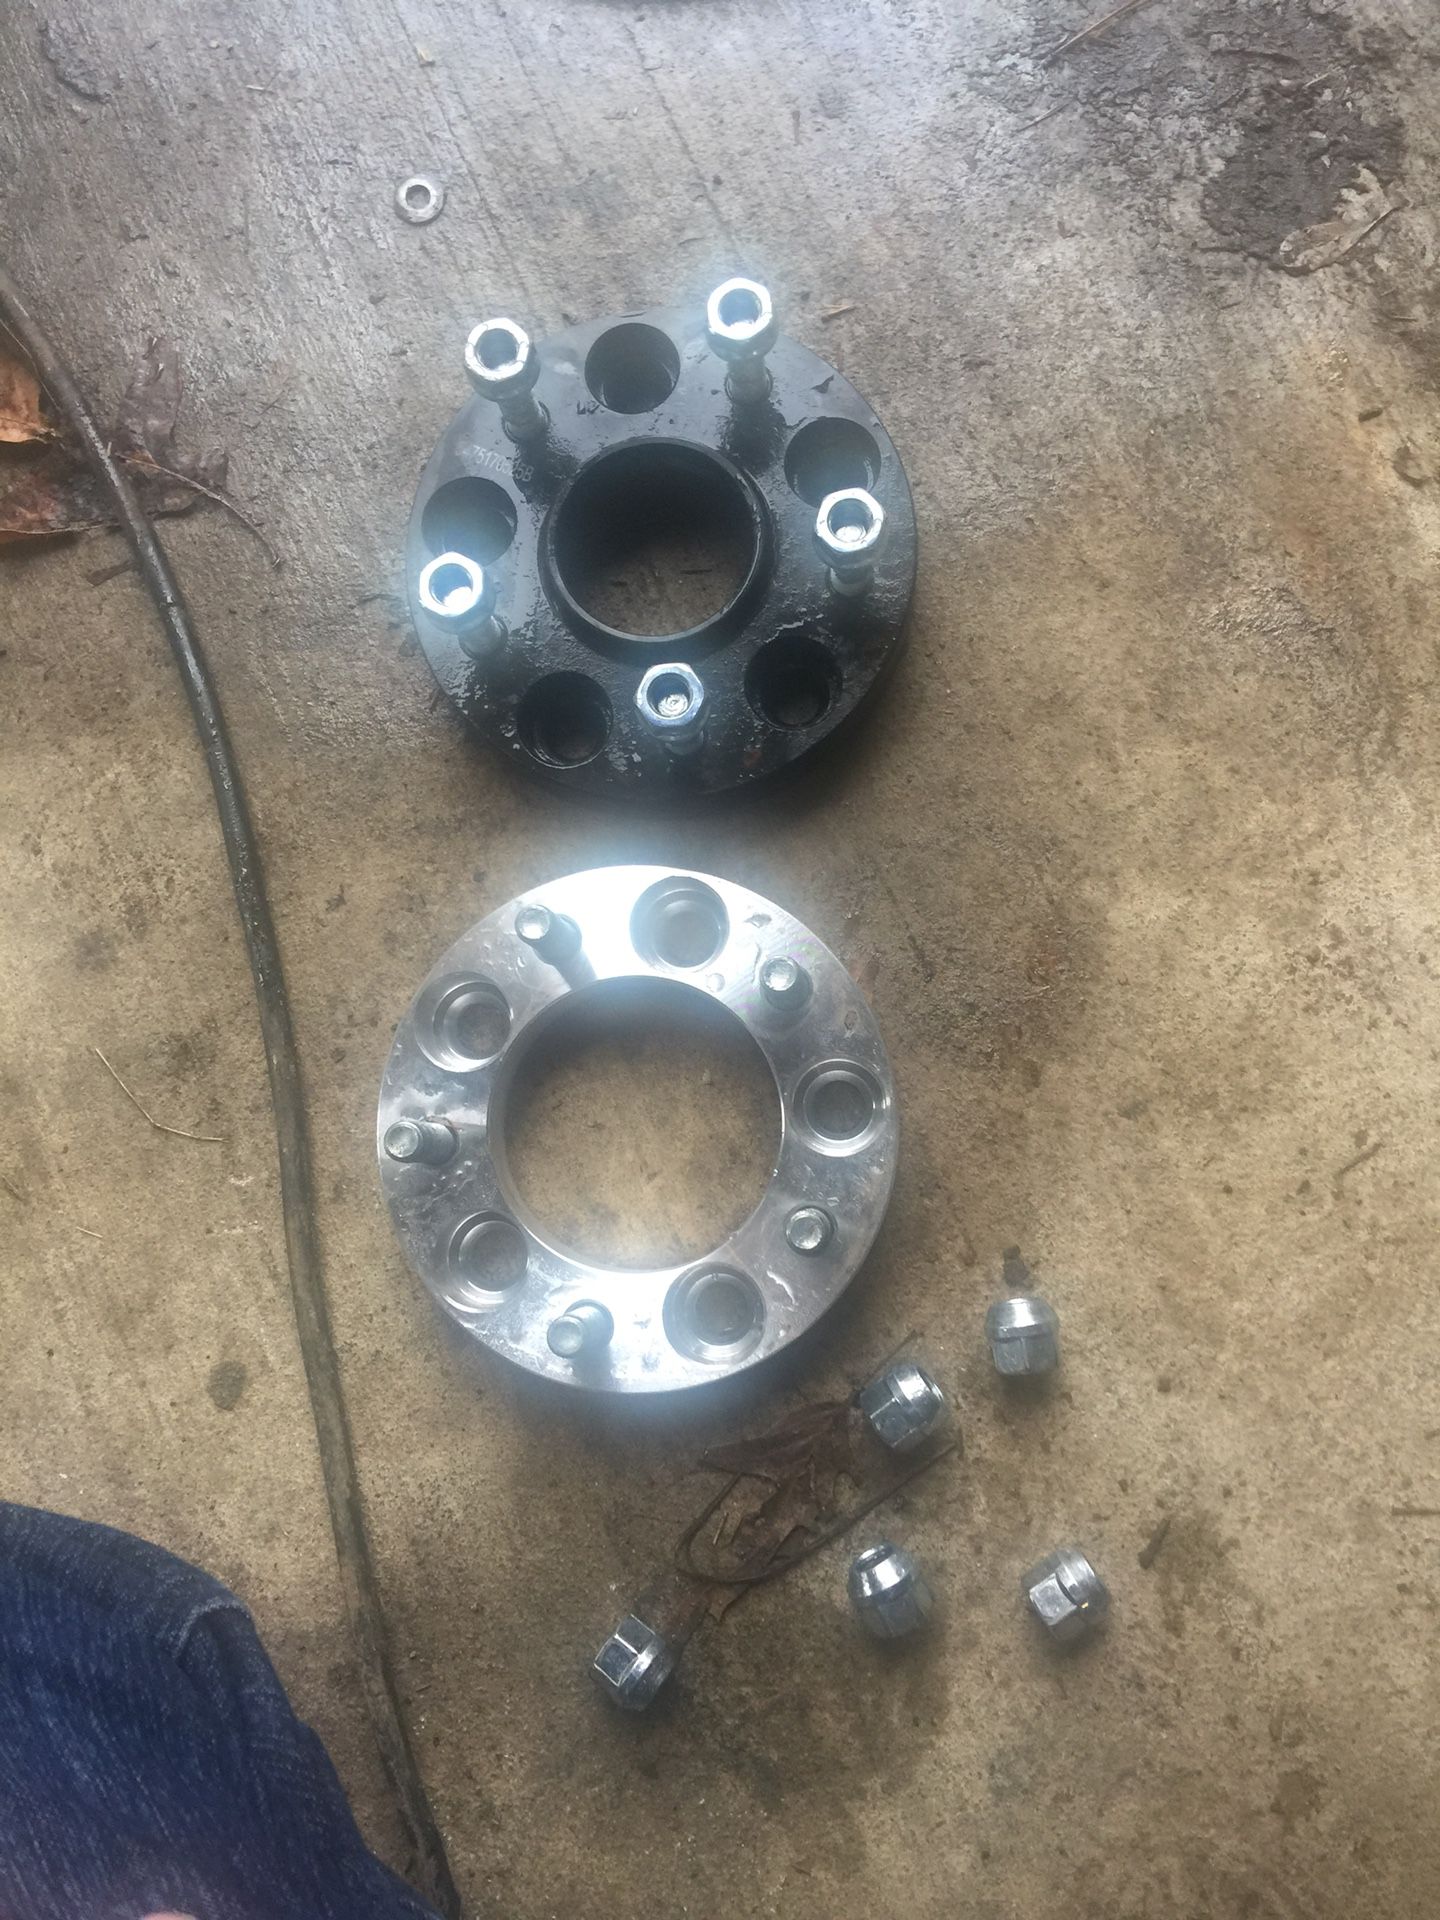 5x4.75 to 5x4.75 spacers 4 total